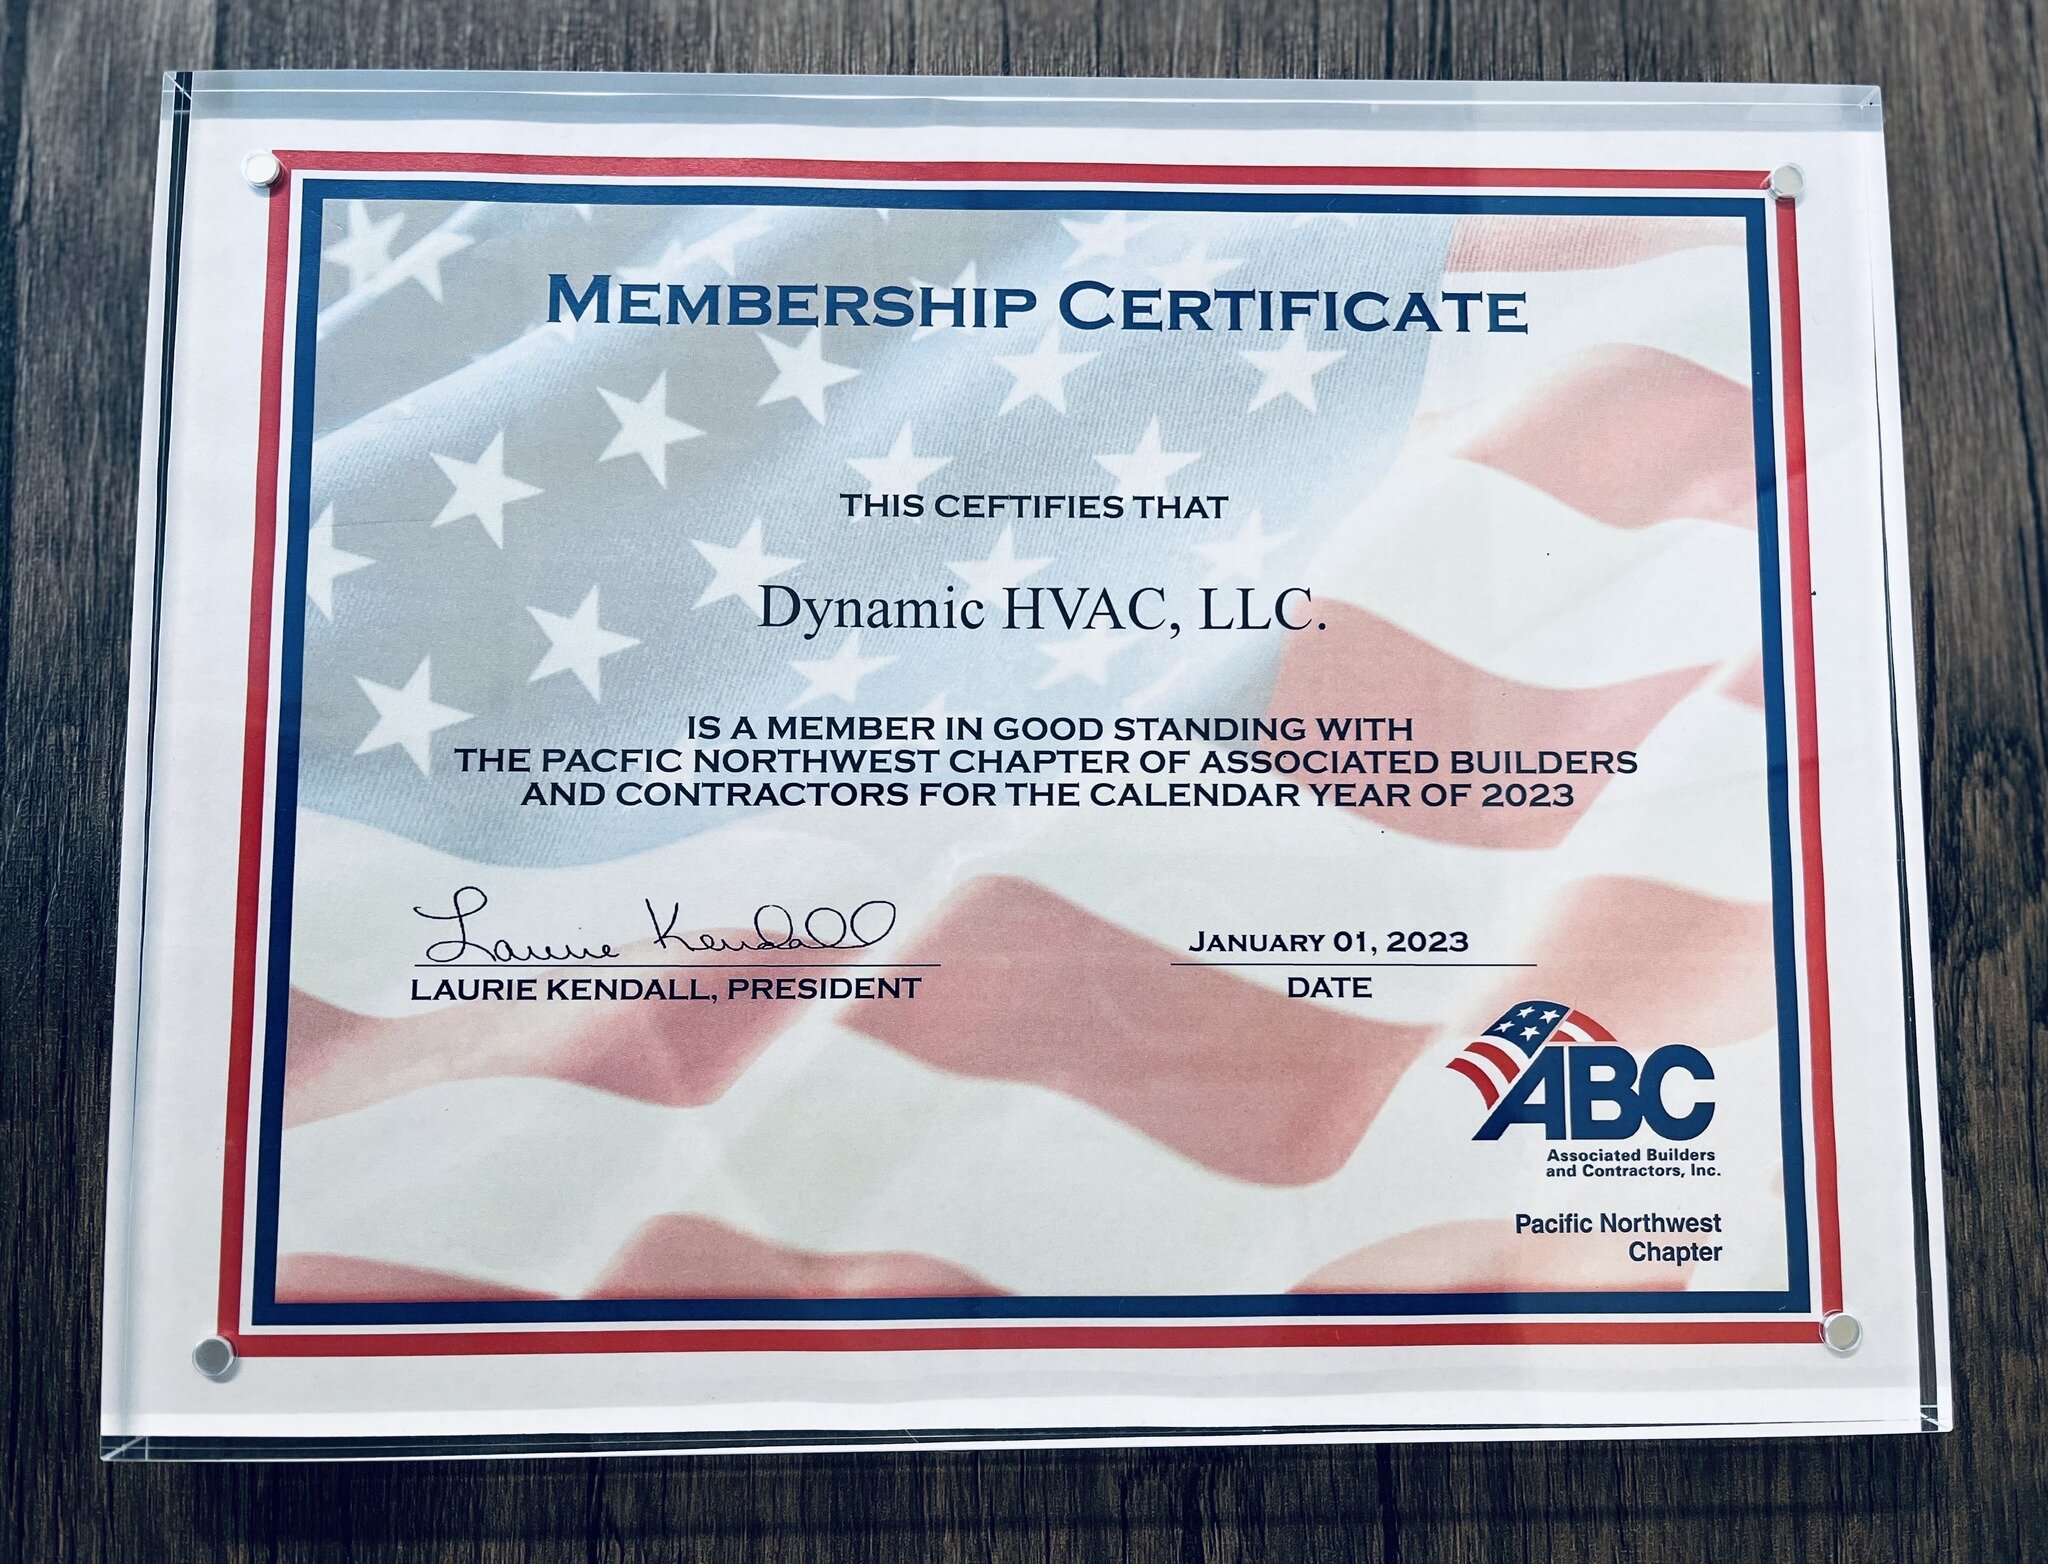 At Dynamic HVAC, LLC safety isn't just a standard, safety is a way of life.

#HVAC #safetyfirst